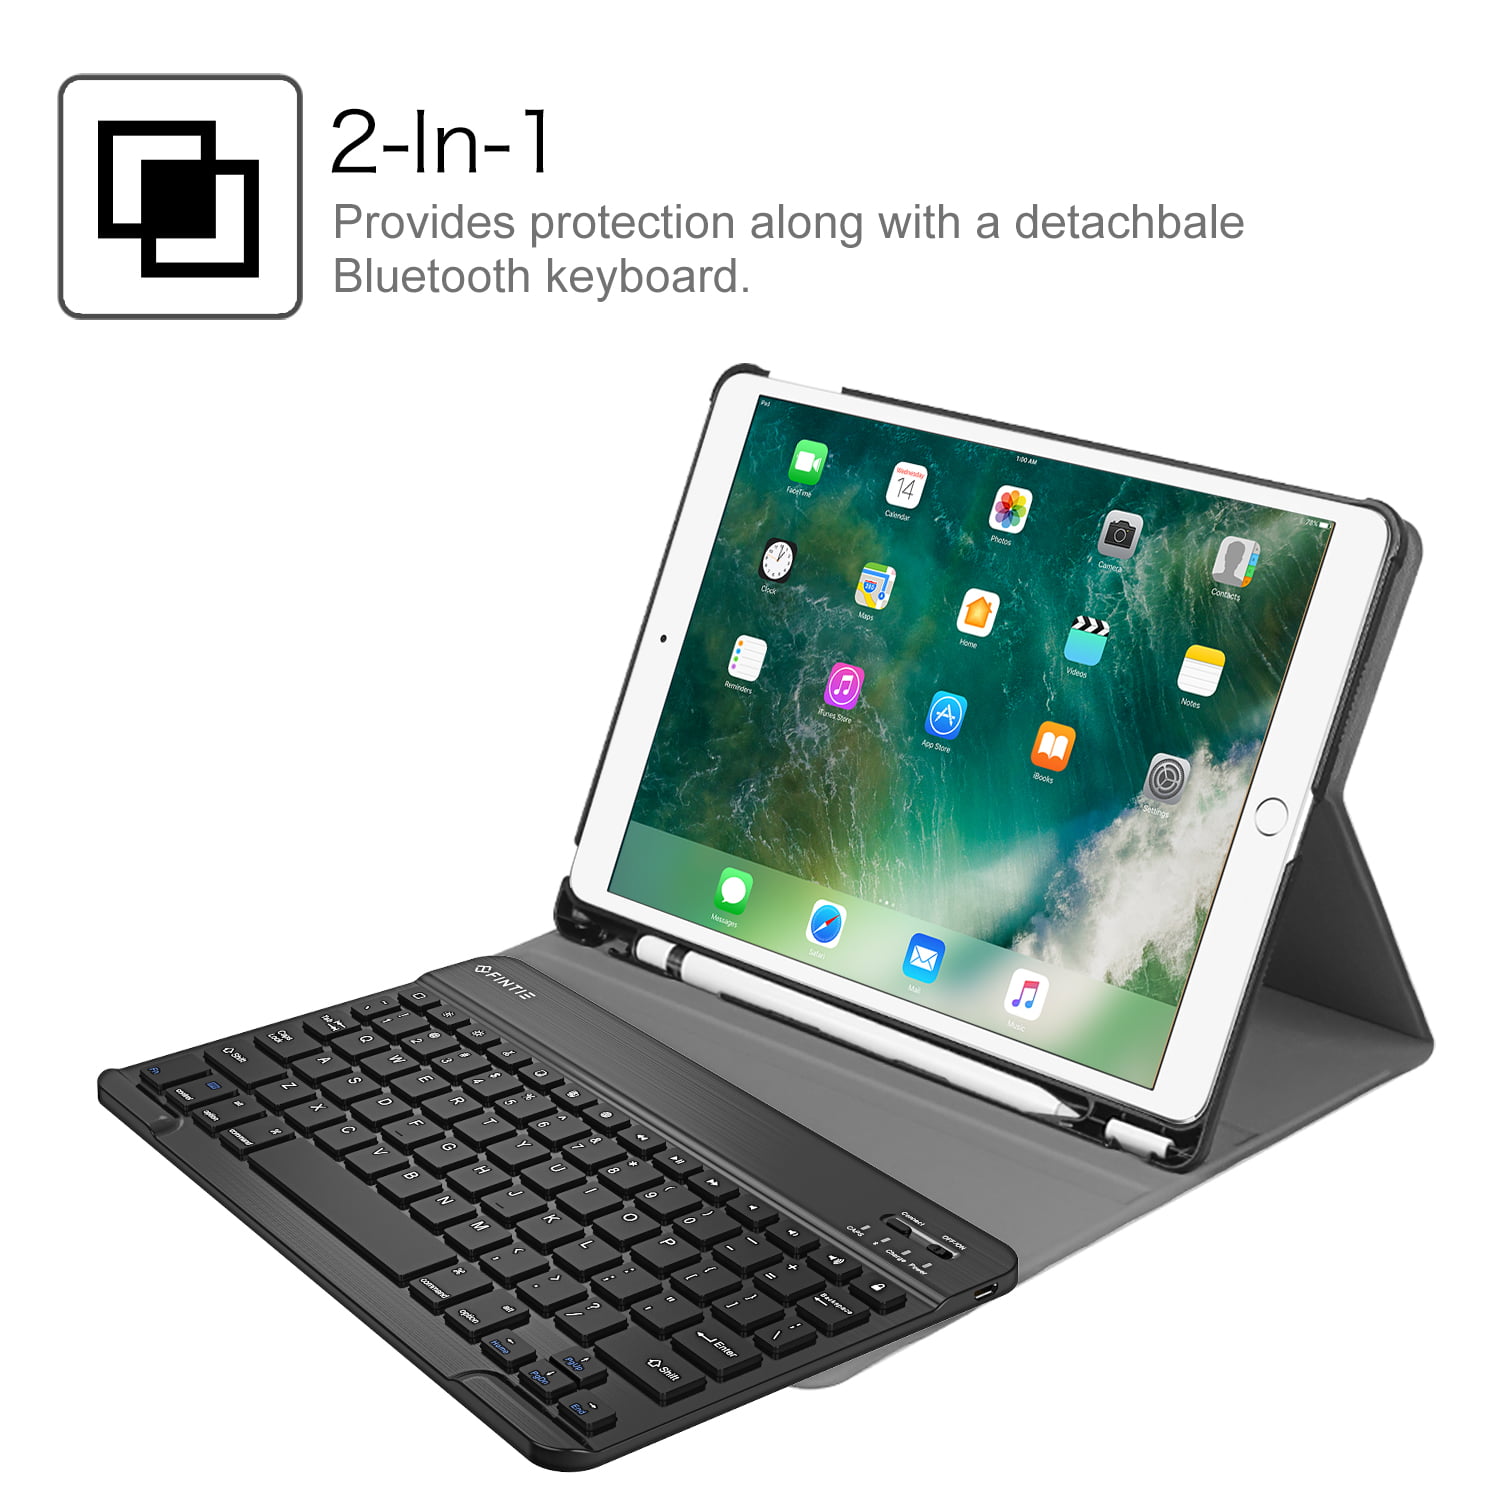 Auto Sleep/Wake Case with Pencil Holder-Detachable Wireless Keyboard Magnetic Folio Cover for New iPad Air 10.5 Inch iPad Keyboard Case 10.5 for iPad Air 3rd Gen 2019 /iPad Pro 10.5 2017 Sky Blue 